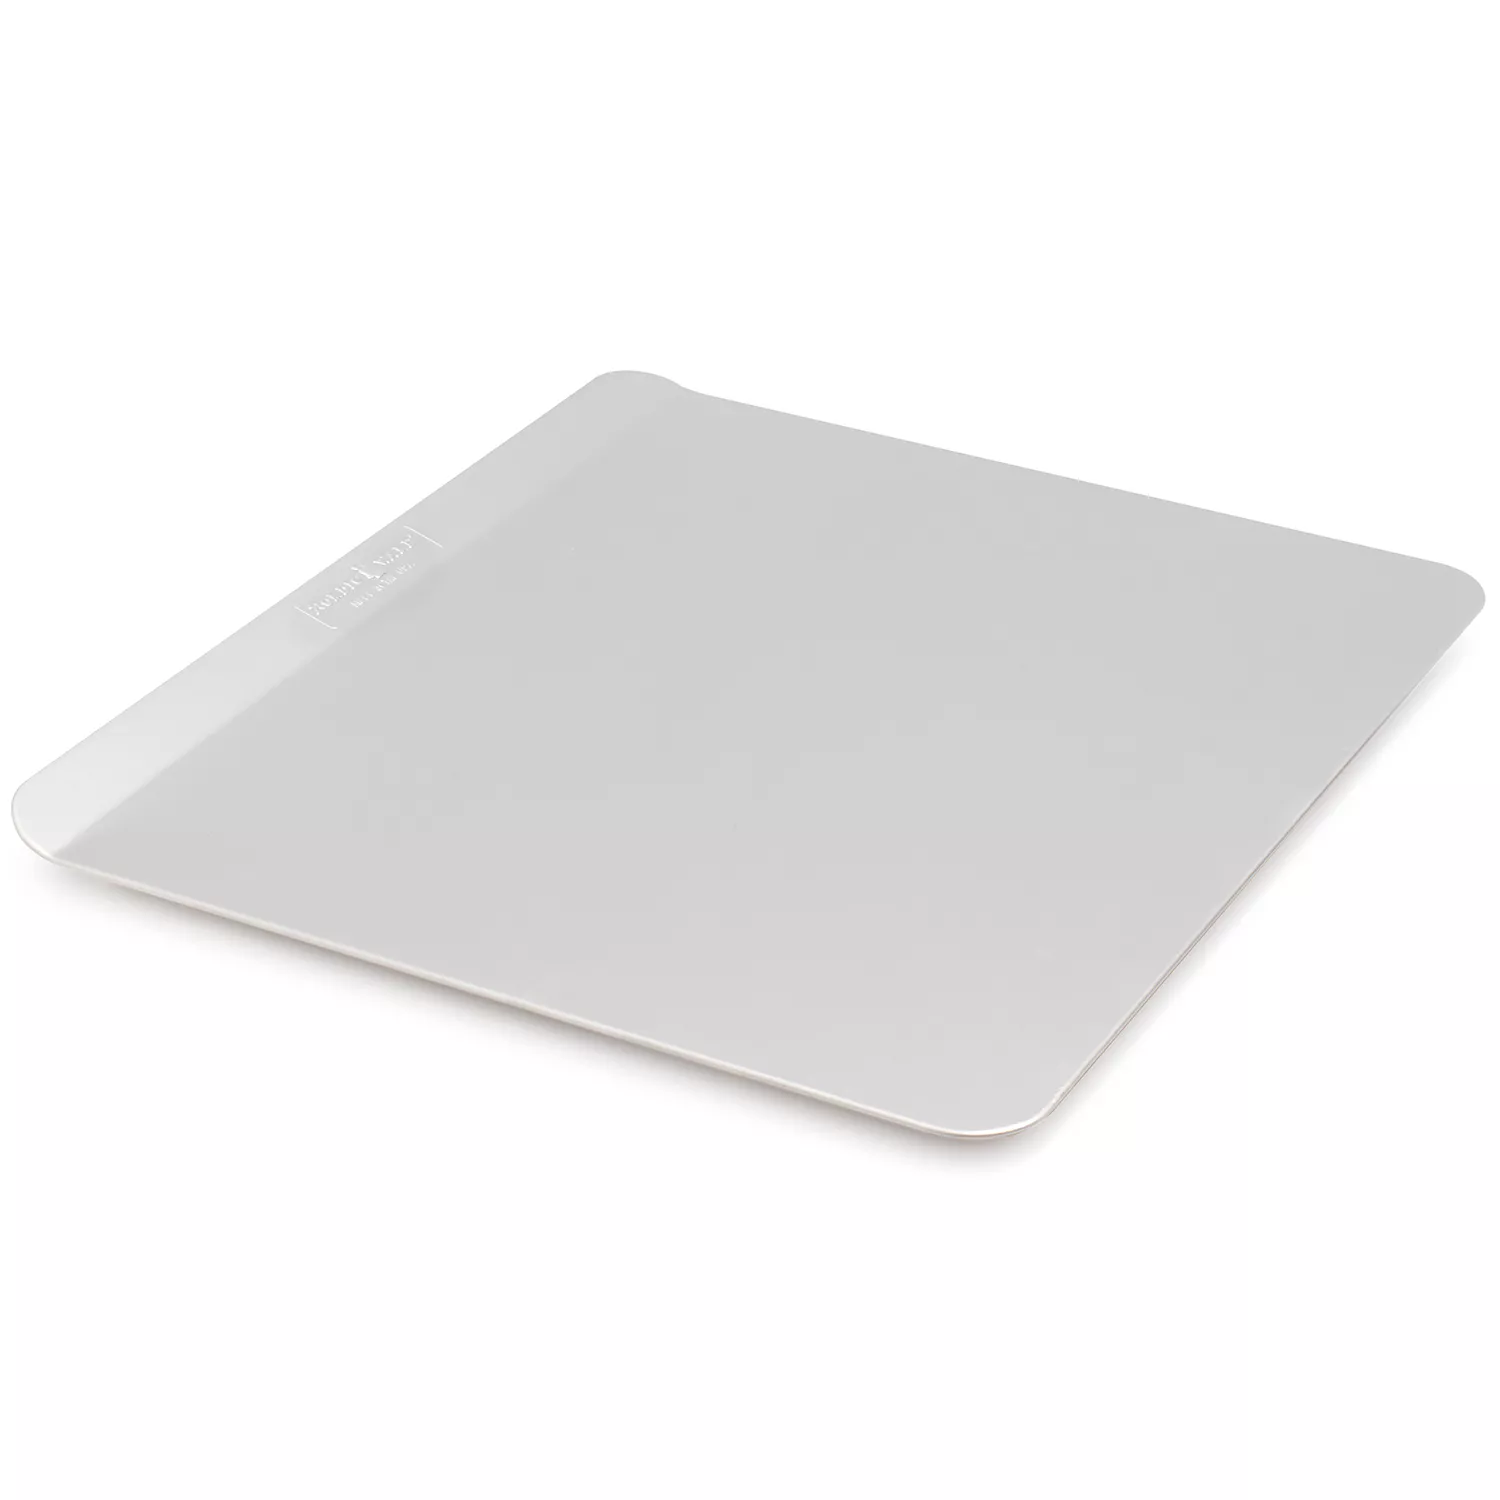 Nordic Ware Naturals for Sur La Table Insulated Cookie Sheet